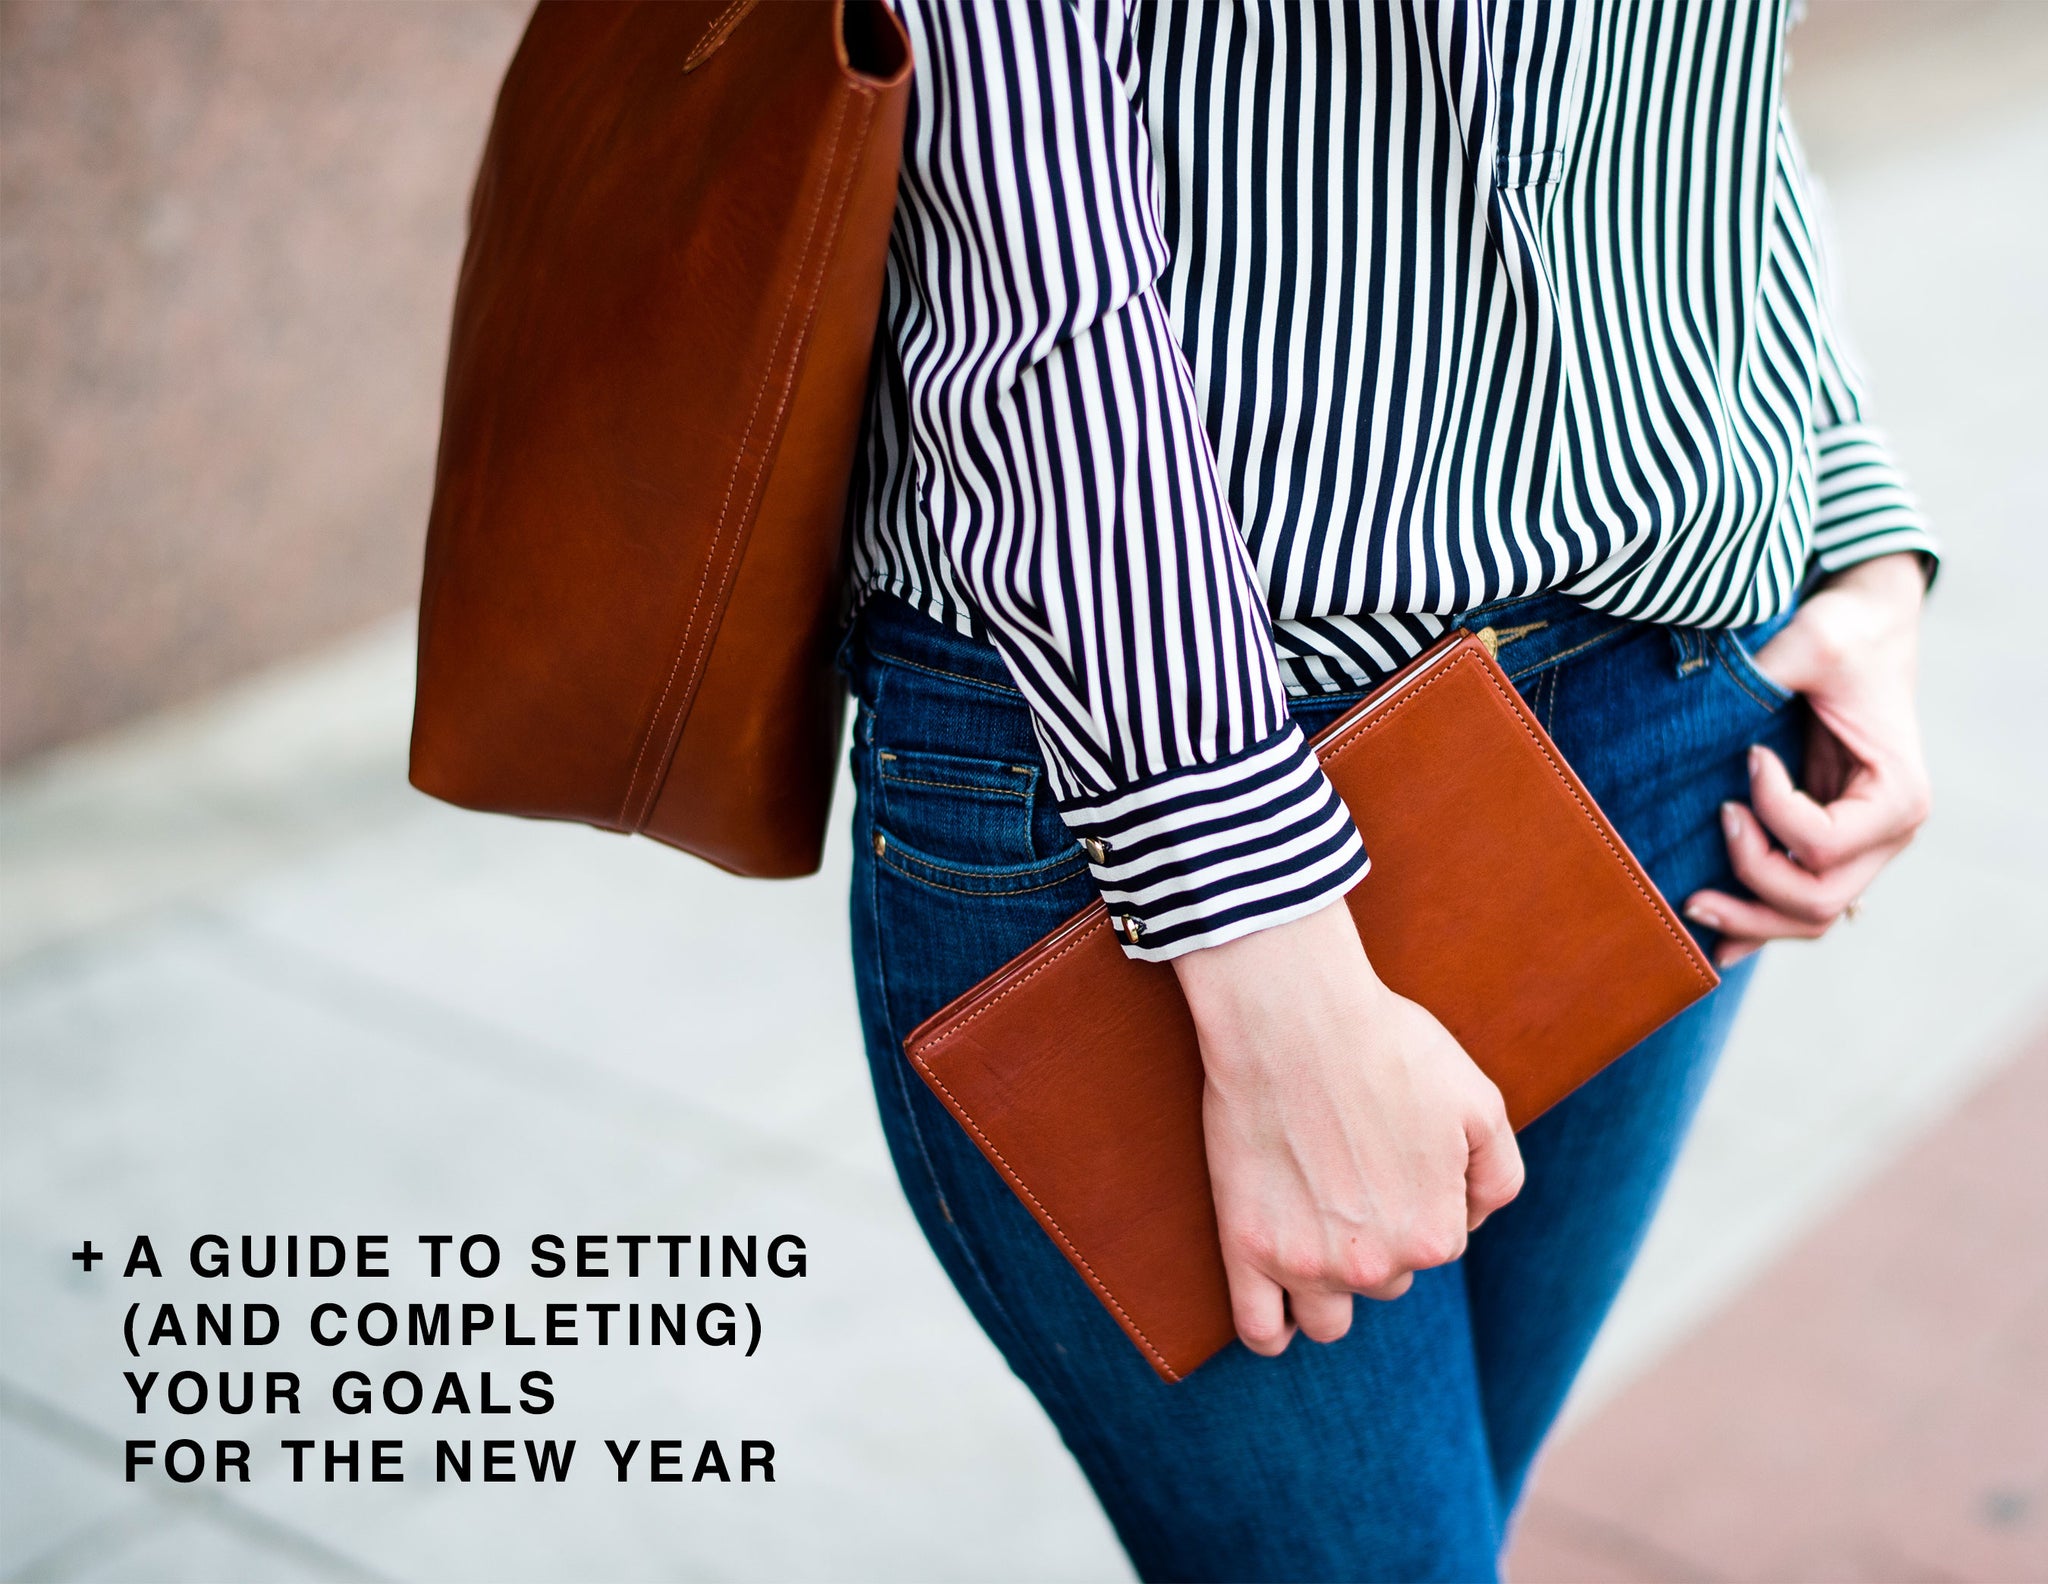 A Practical Guide to Setting (and Completing) Your Goals and Resolutions